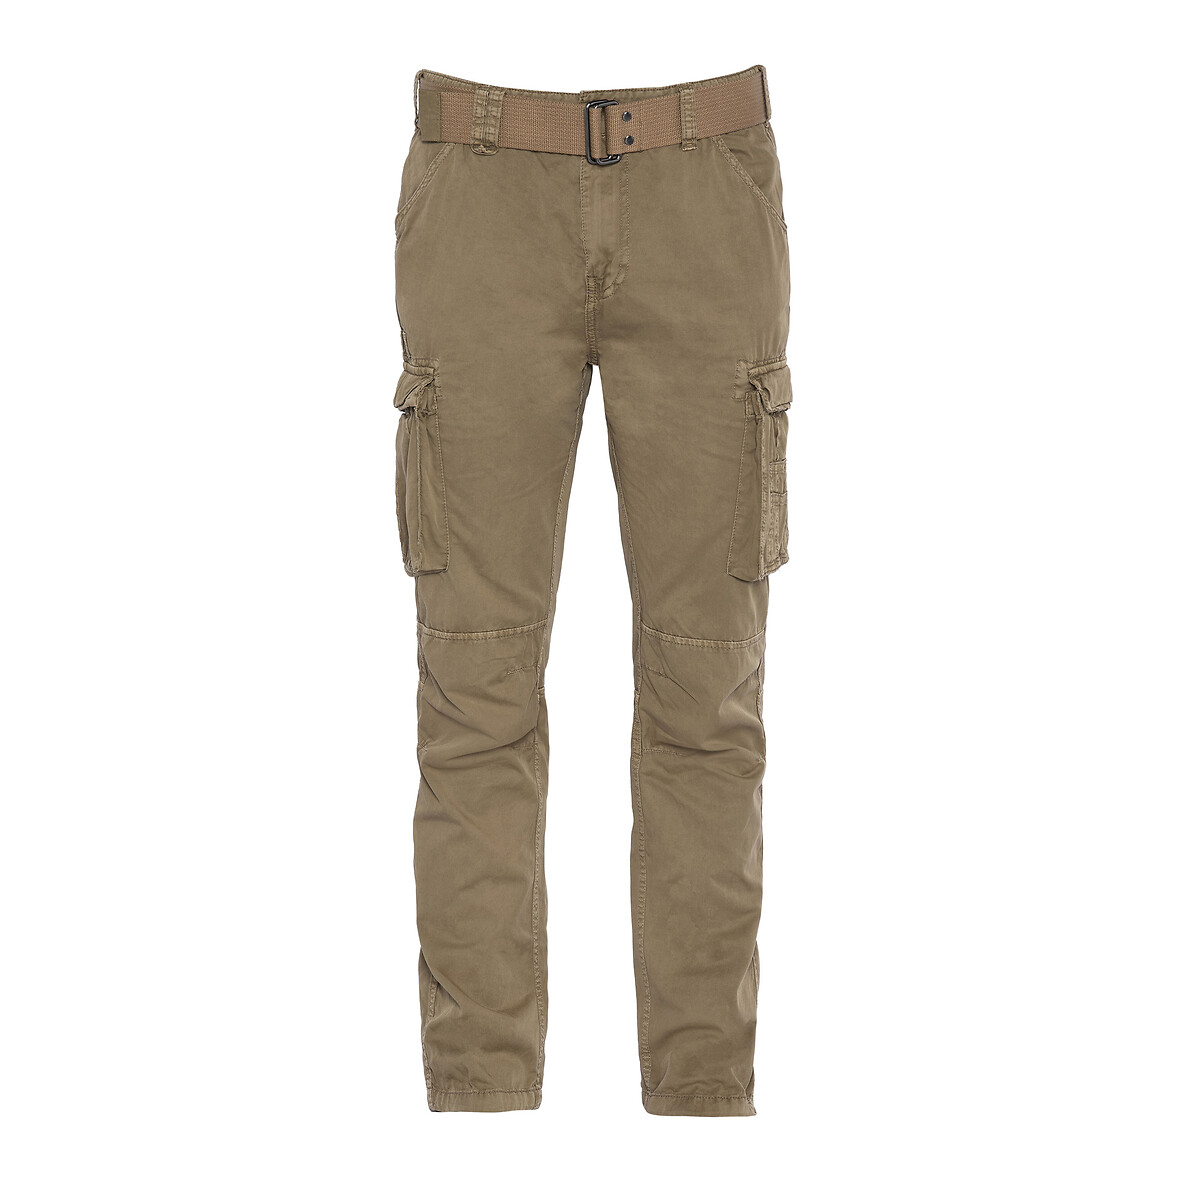 tr ranger 70 cargo trousers in cotton with belt